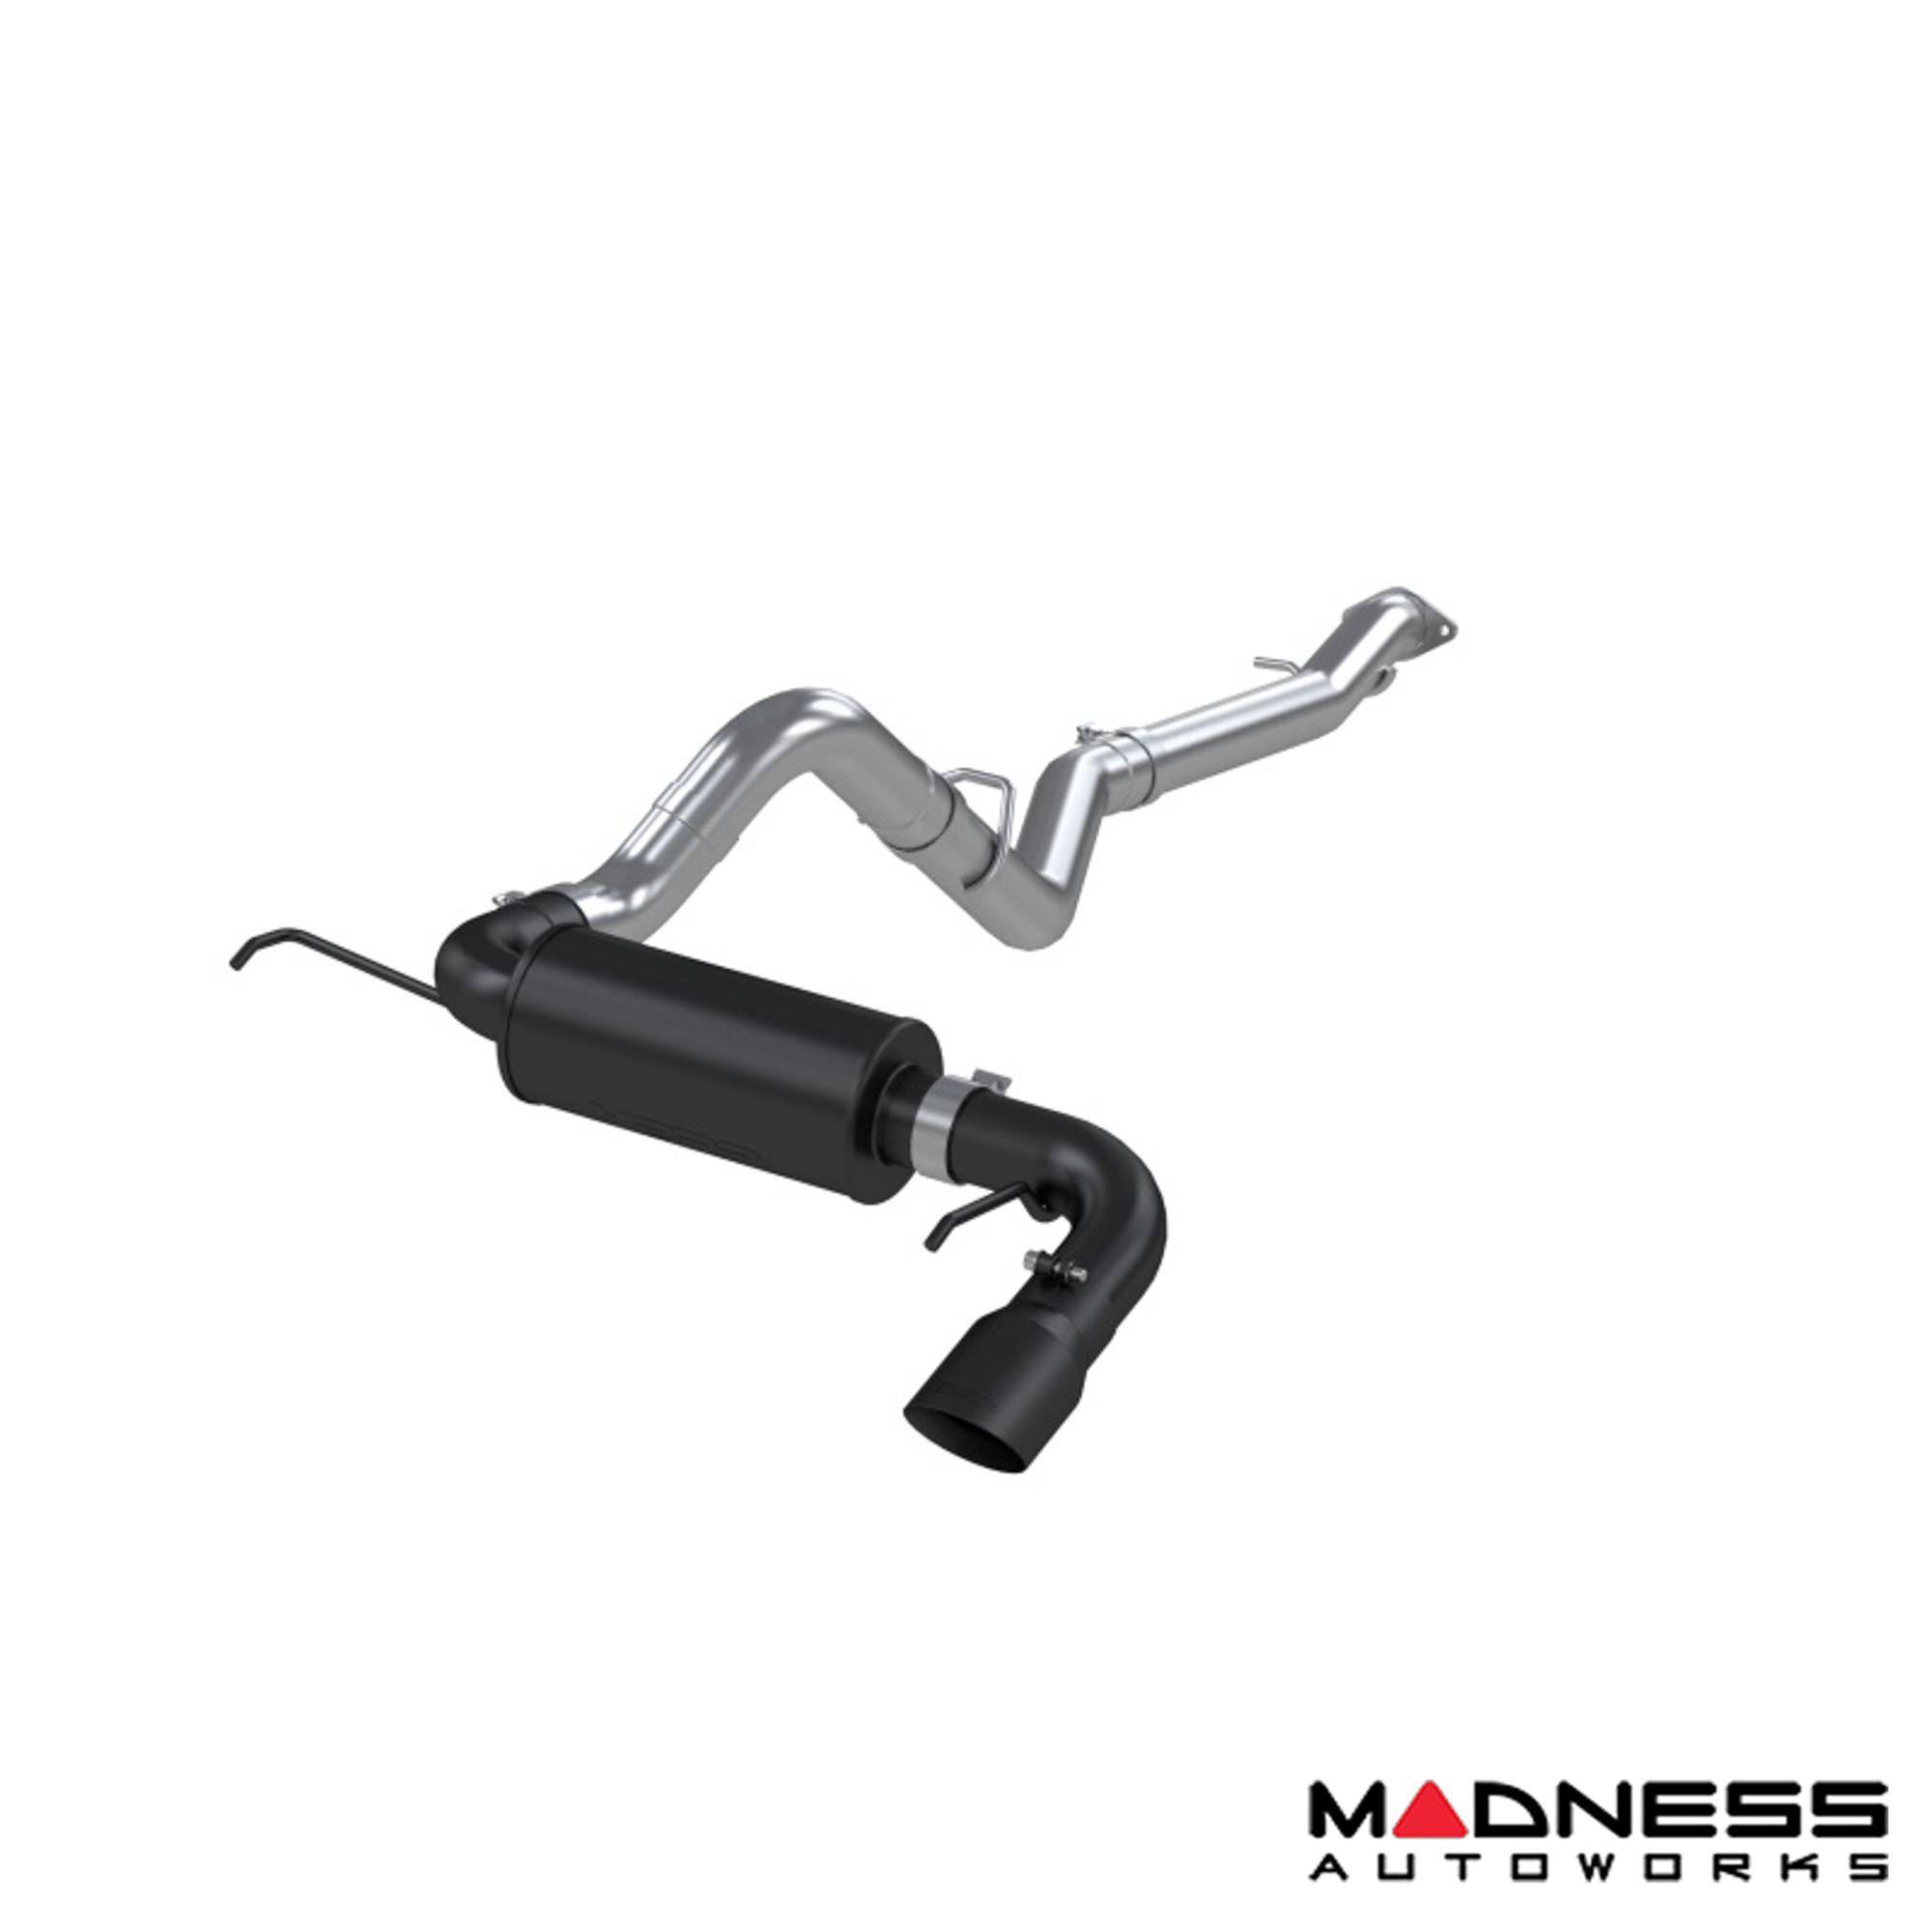 Ford Bronco Performance Exhaust System - Cat Back - MBRP - Aluminized Black - High Clearance - 3"